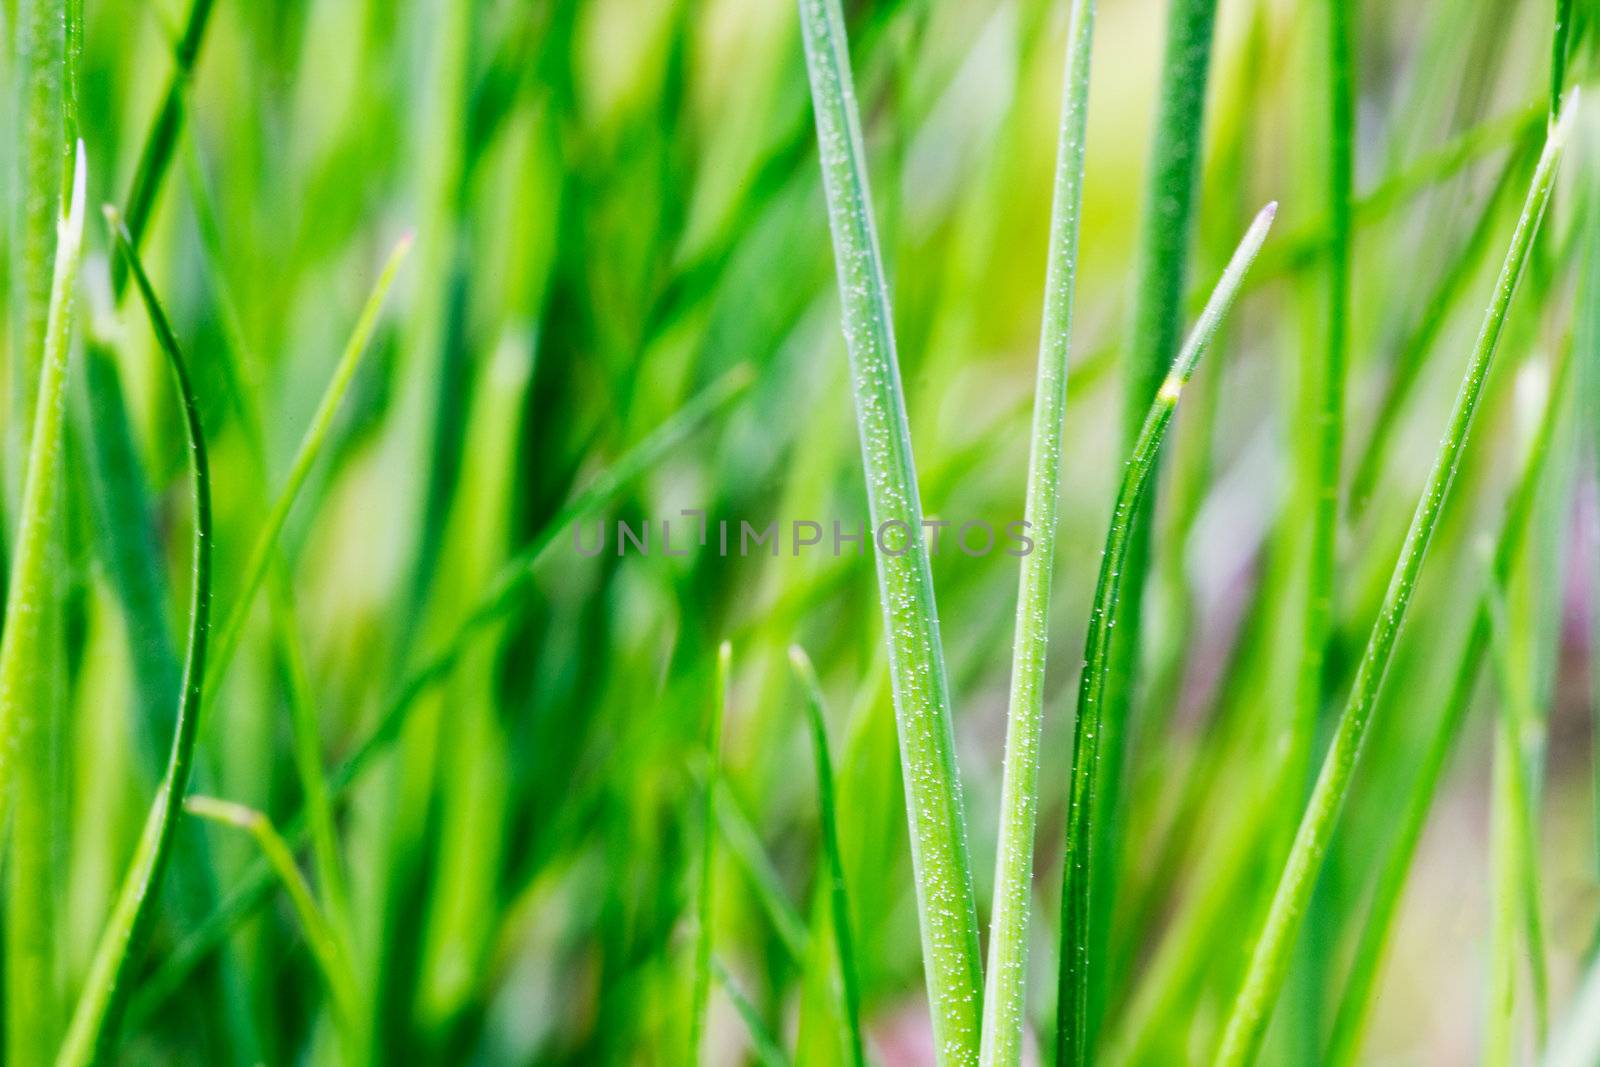 An abstract grass background with light motion blur on some of the blades